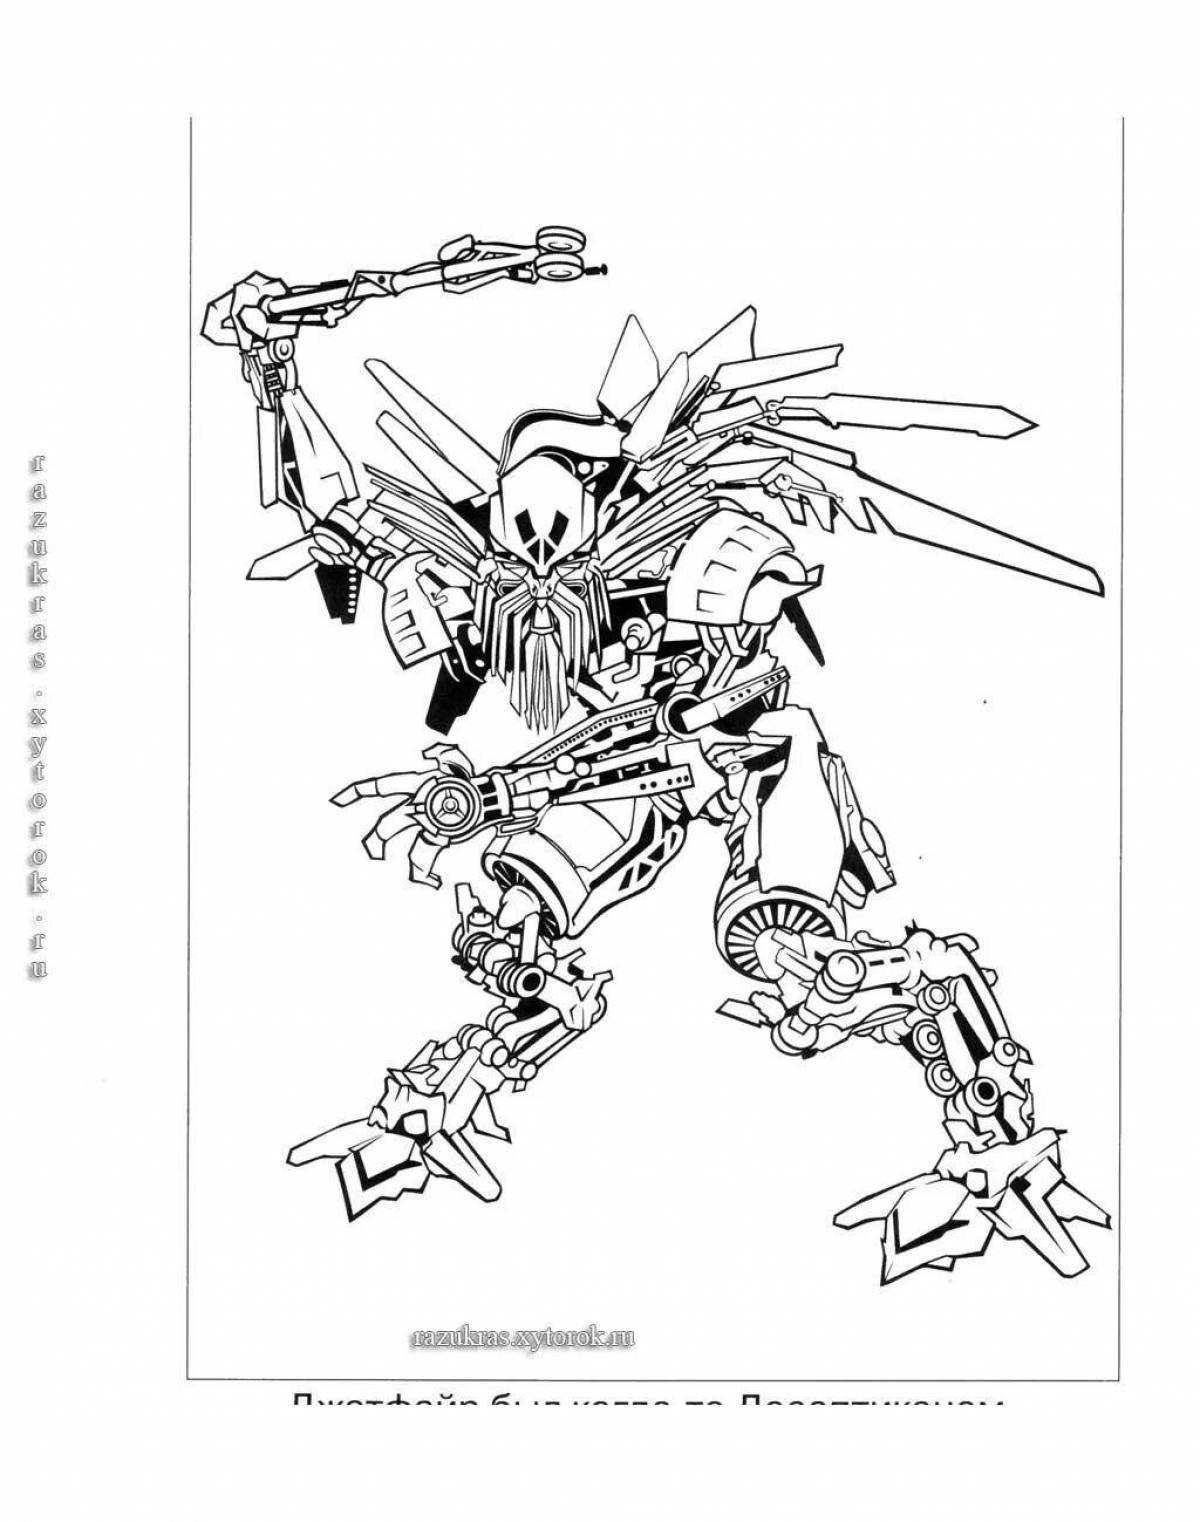 Festive barricade coloring page